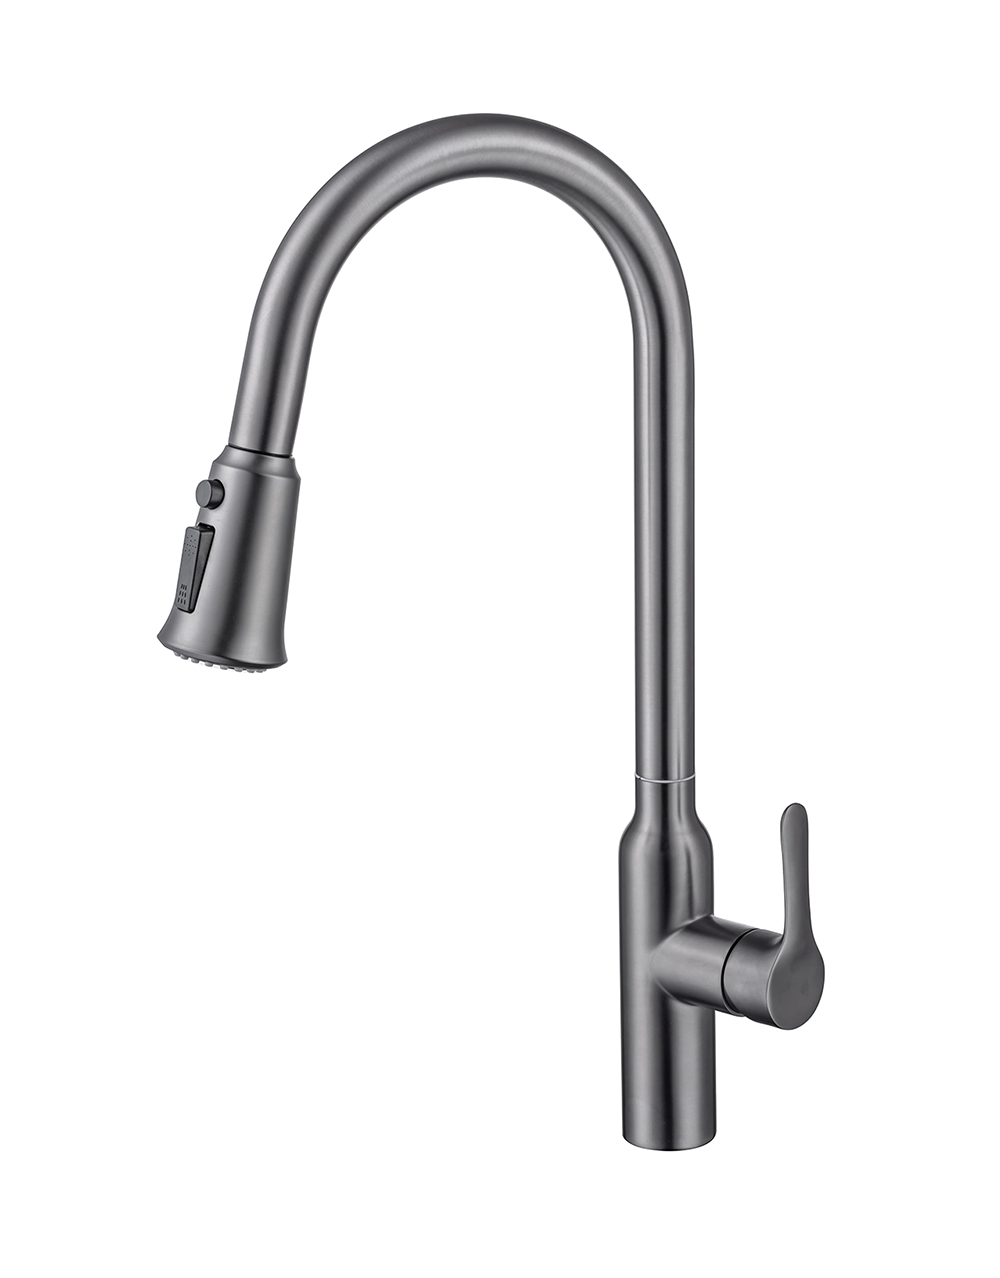 Gun Metal faucet Three function pull out faucet stainless steel kitchen taps ODM/OEM